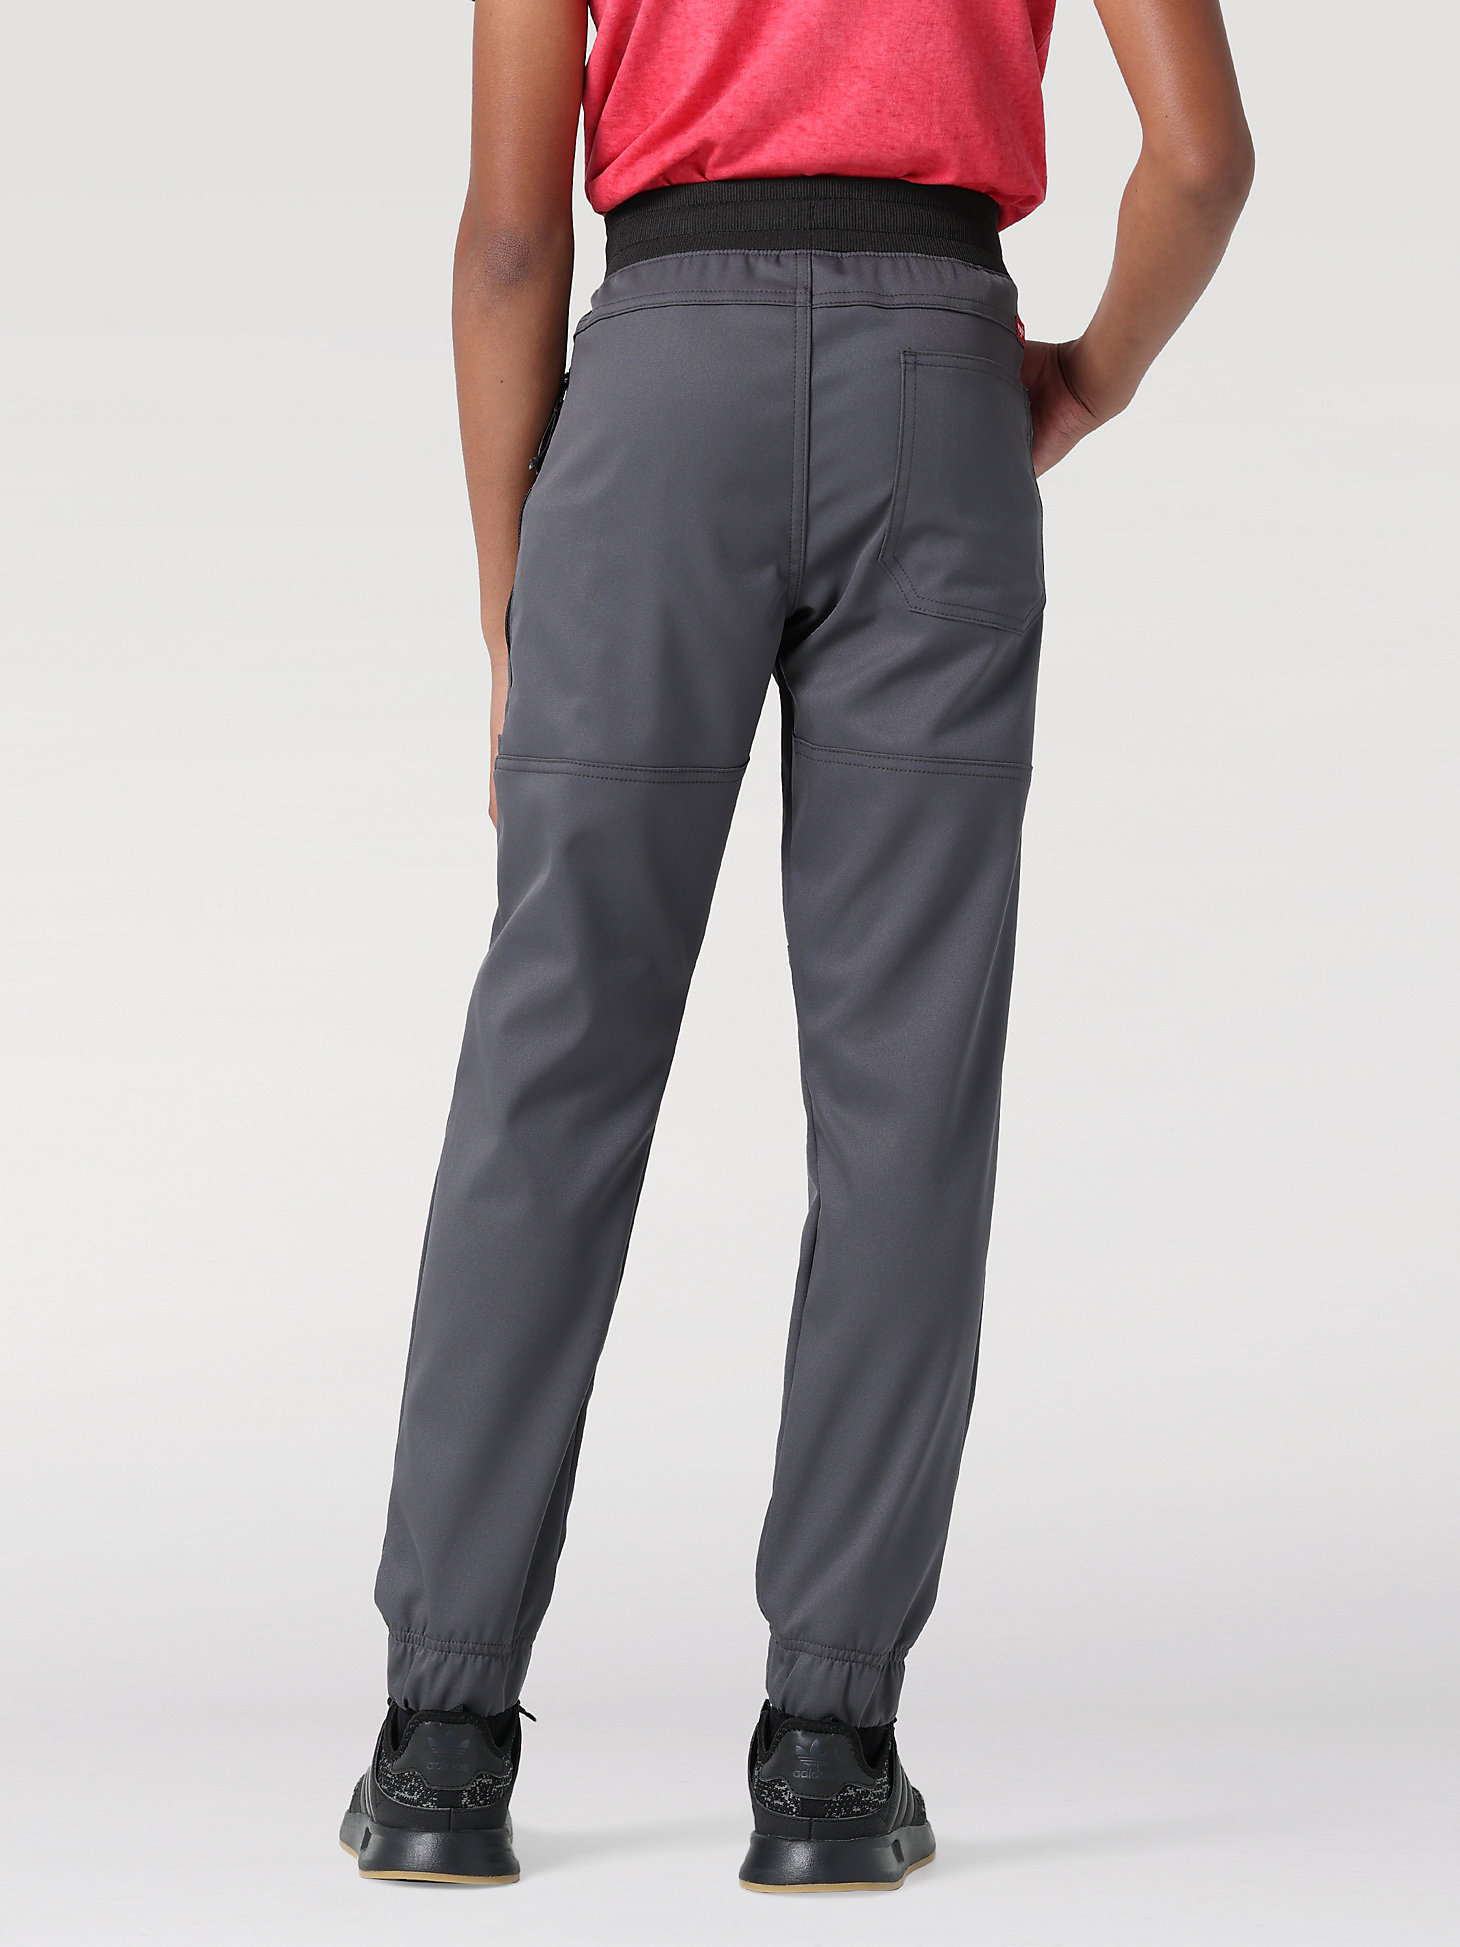 Boy's Connect Cargo Wireless Pant (4-7) in Grey Pinstripe